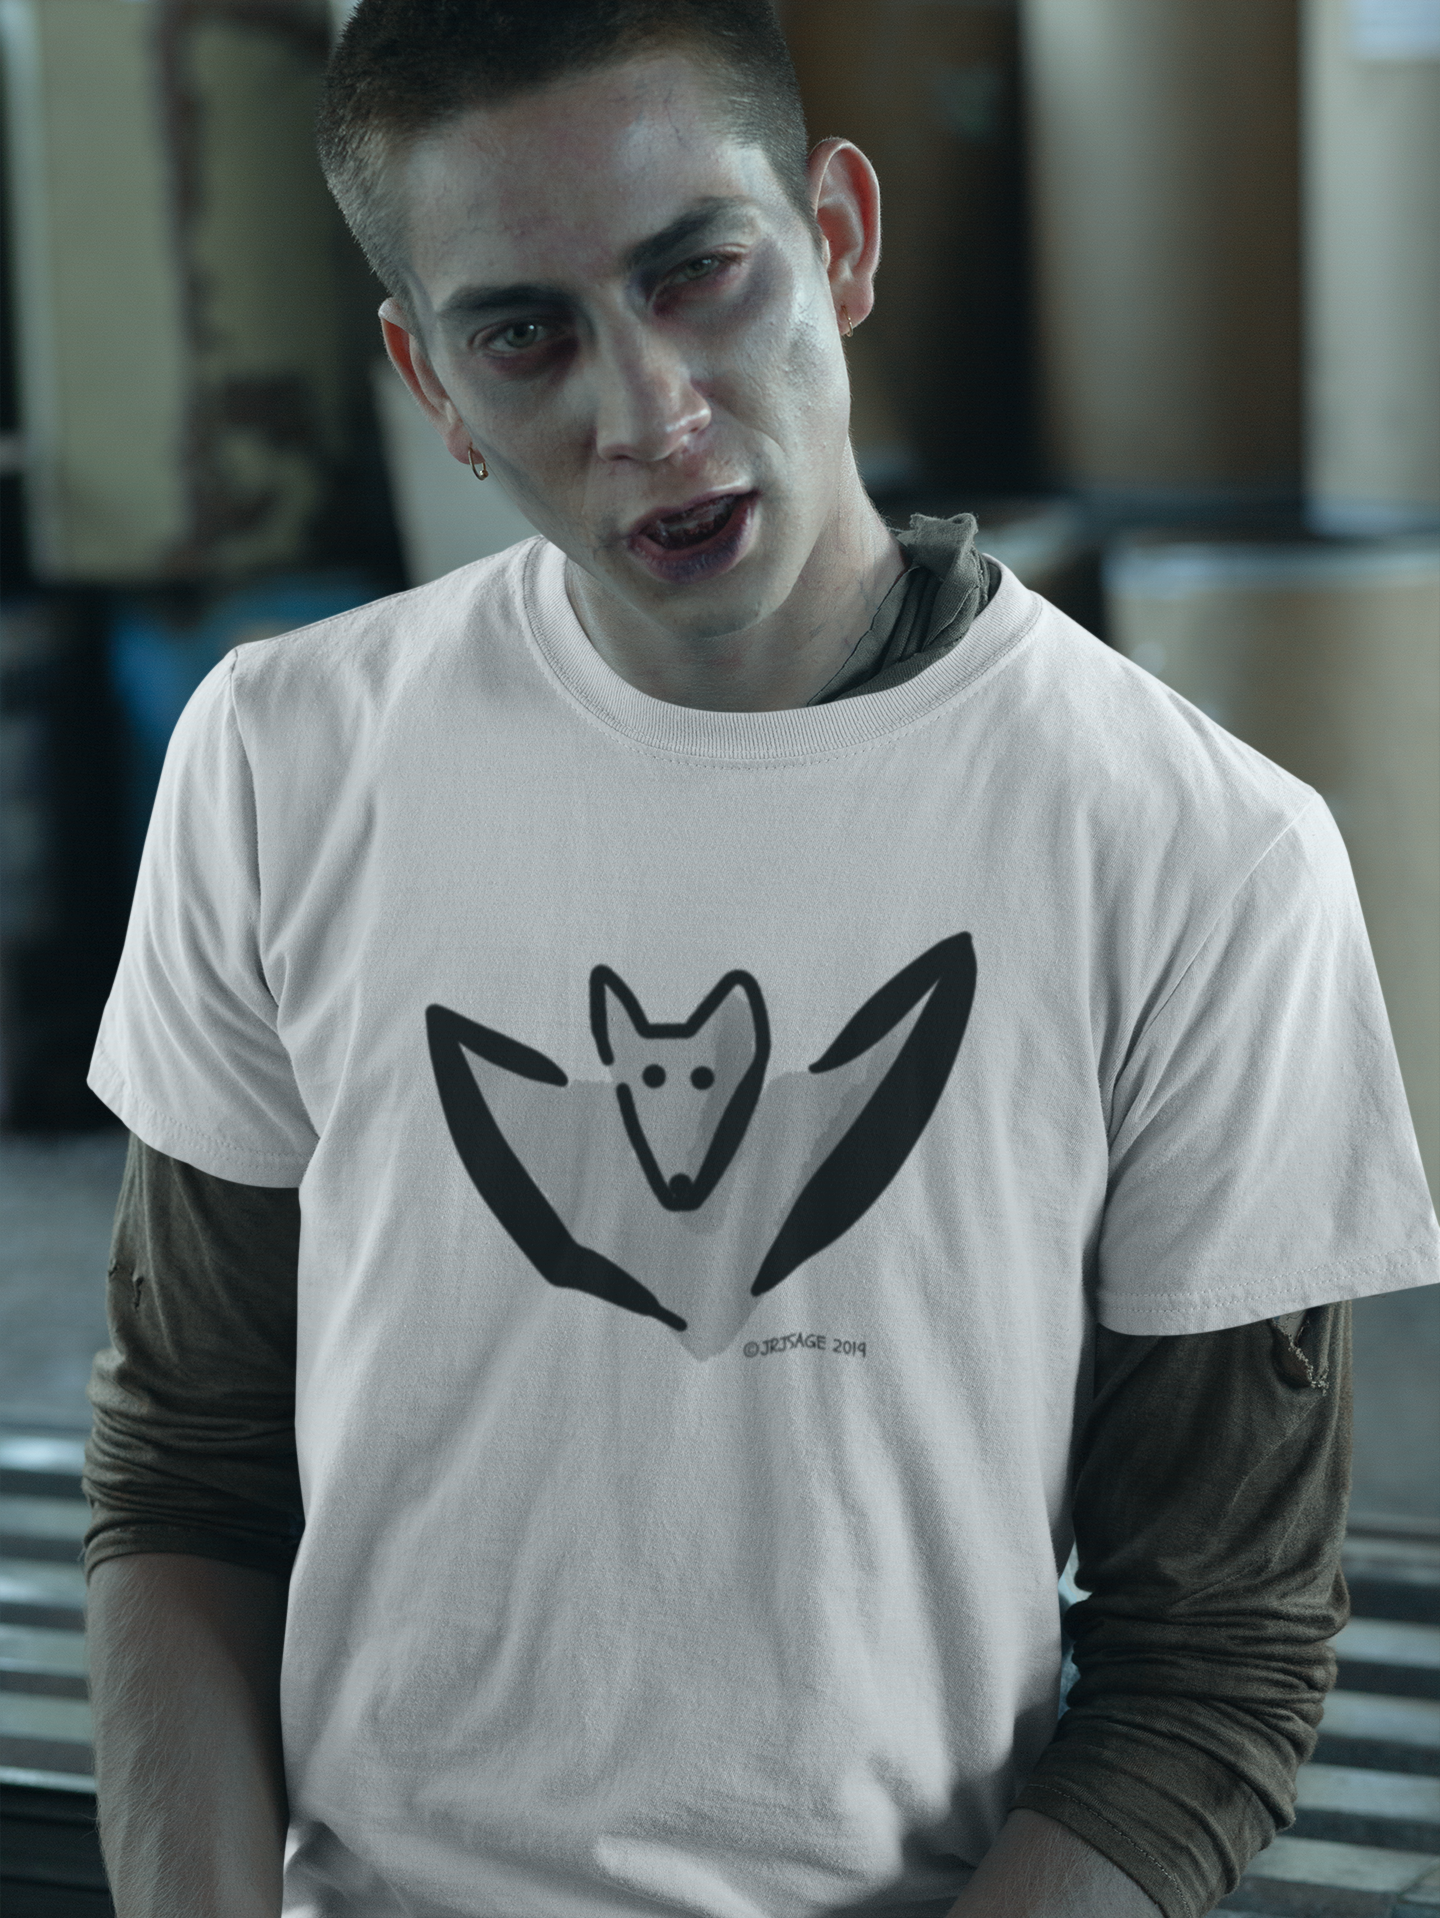 A man dressed as a zombie for Halloween wearing a cute Bertie Bat original illustrated design on a Hector and Bone quality vegan cotton bat t-shirt